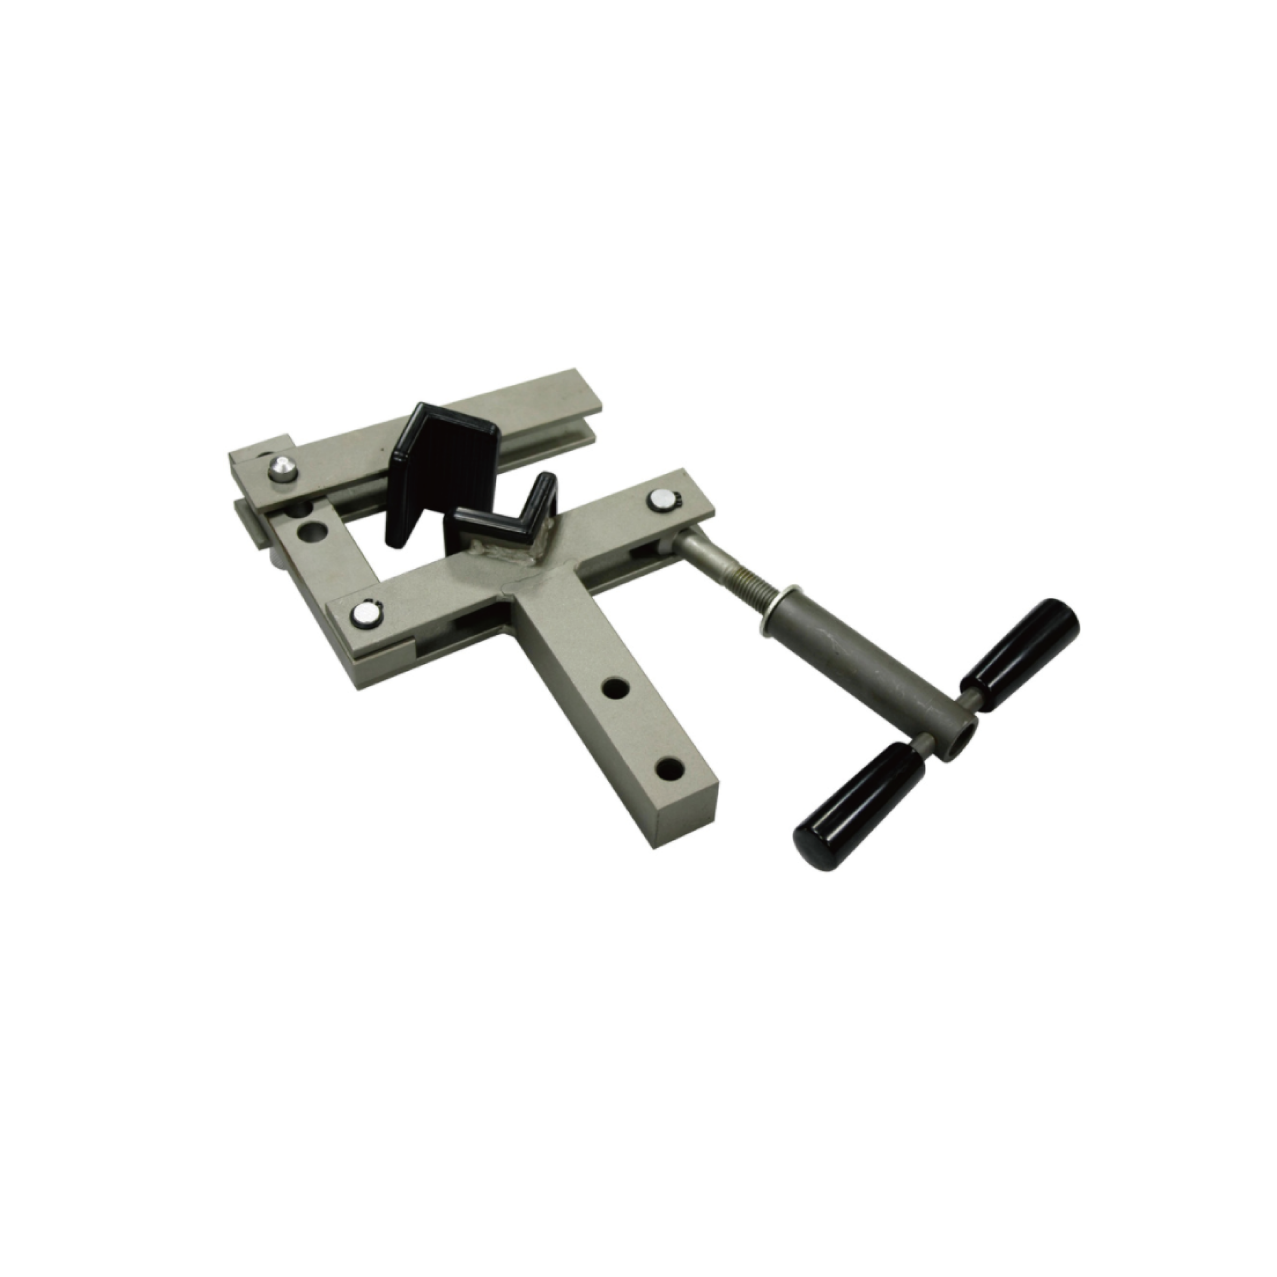 Special Vise for Struts with Rubber Covers